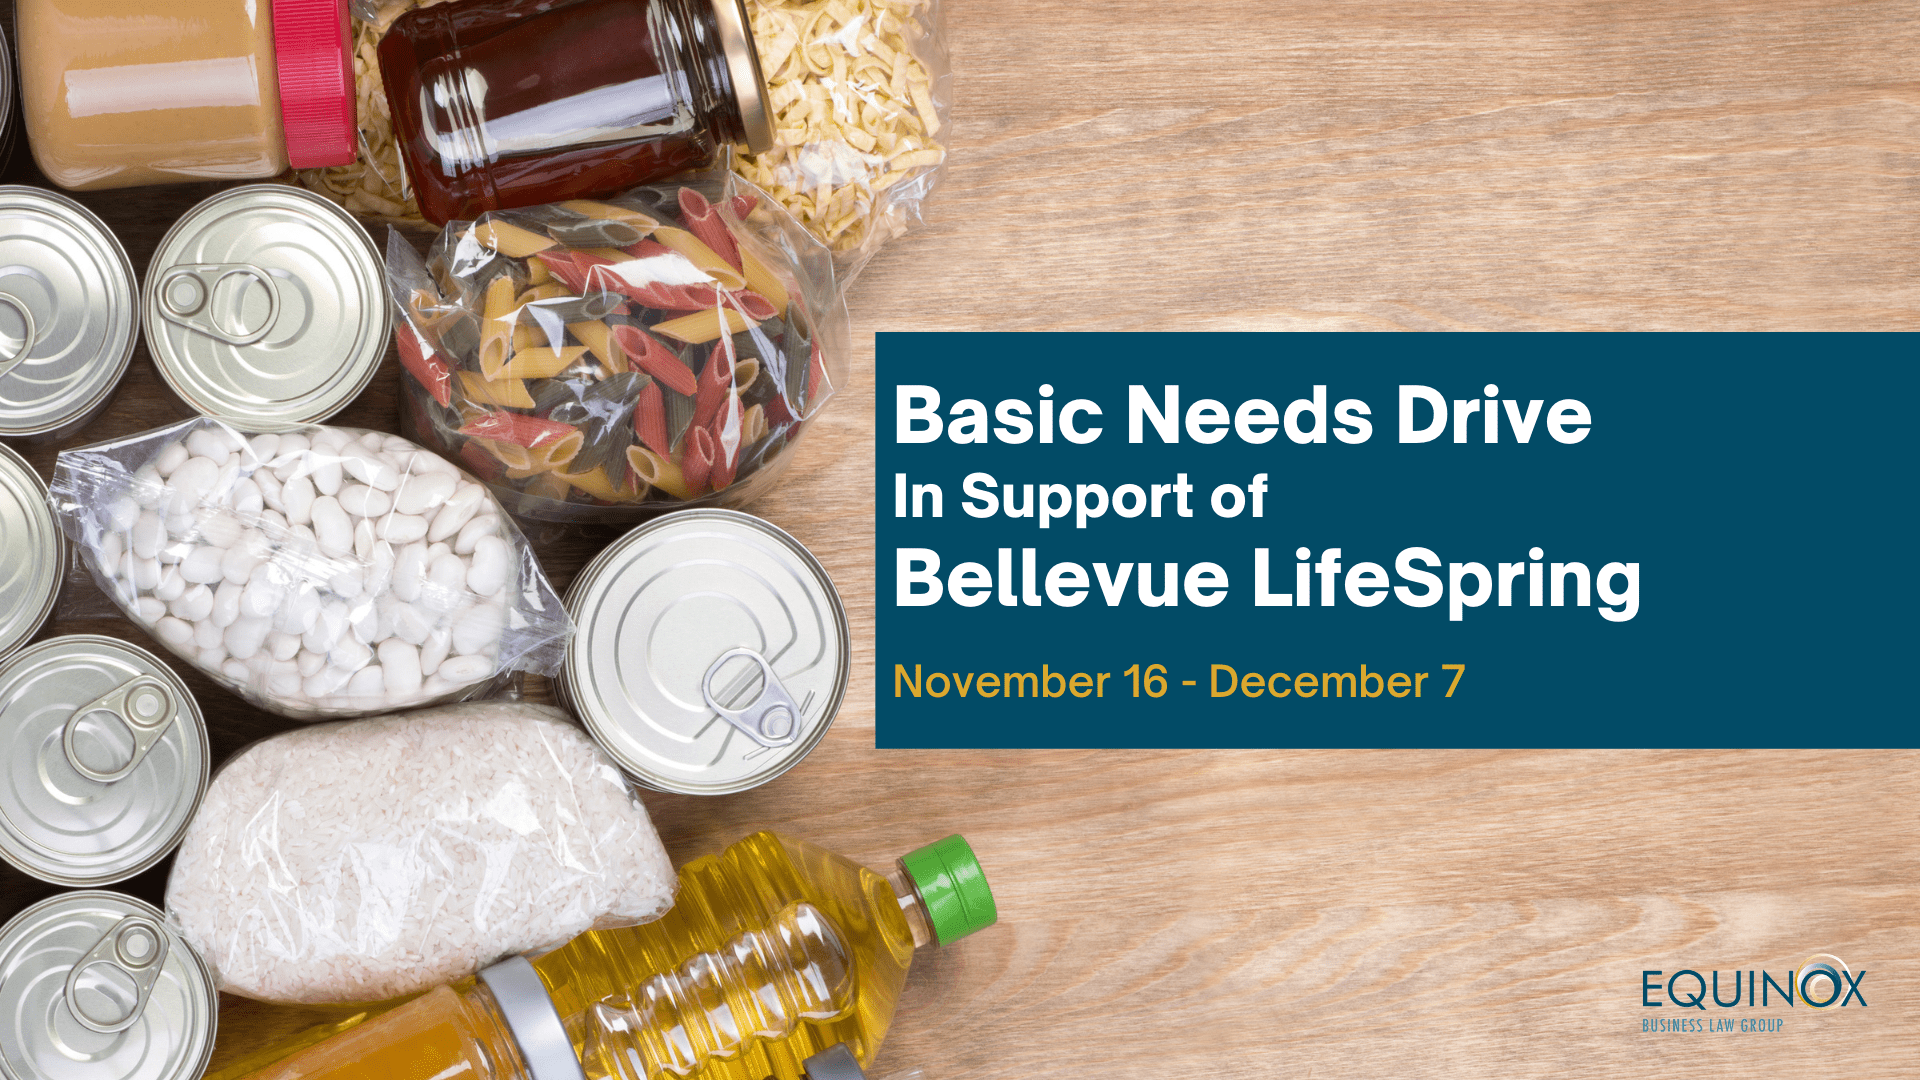 Basic Needs Drive for Bellevue LifeSpring Donations